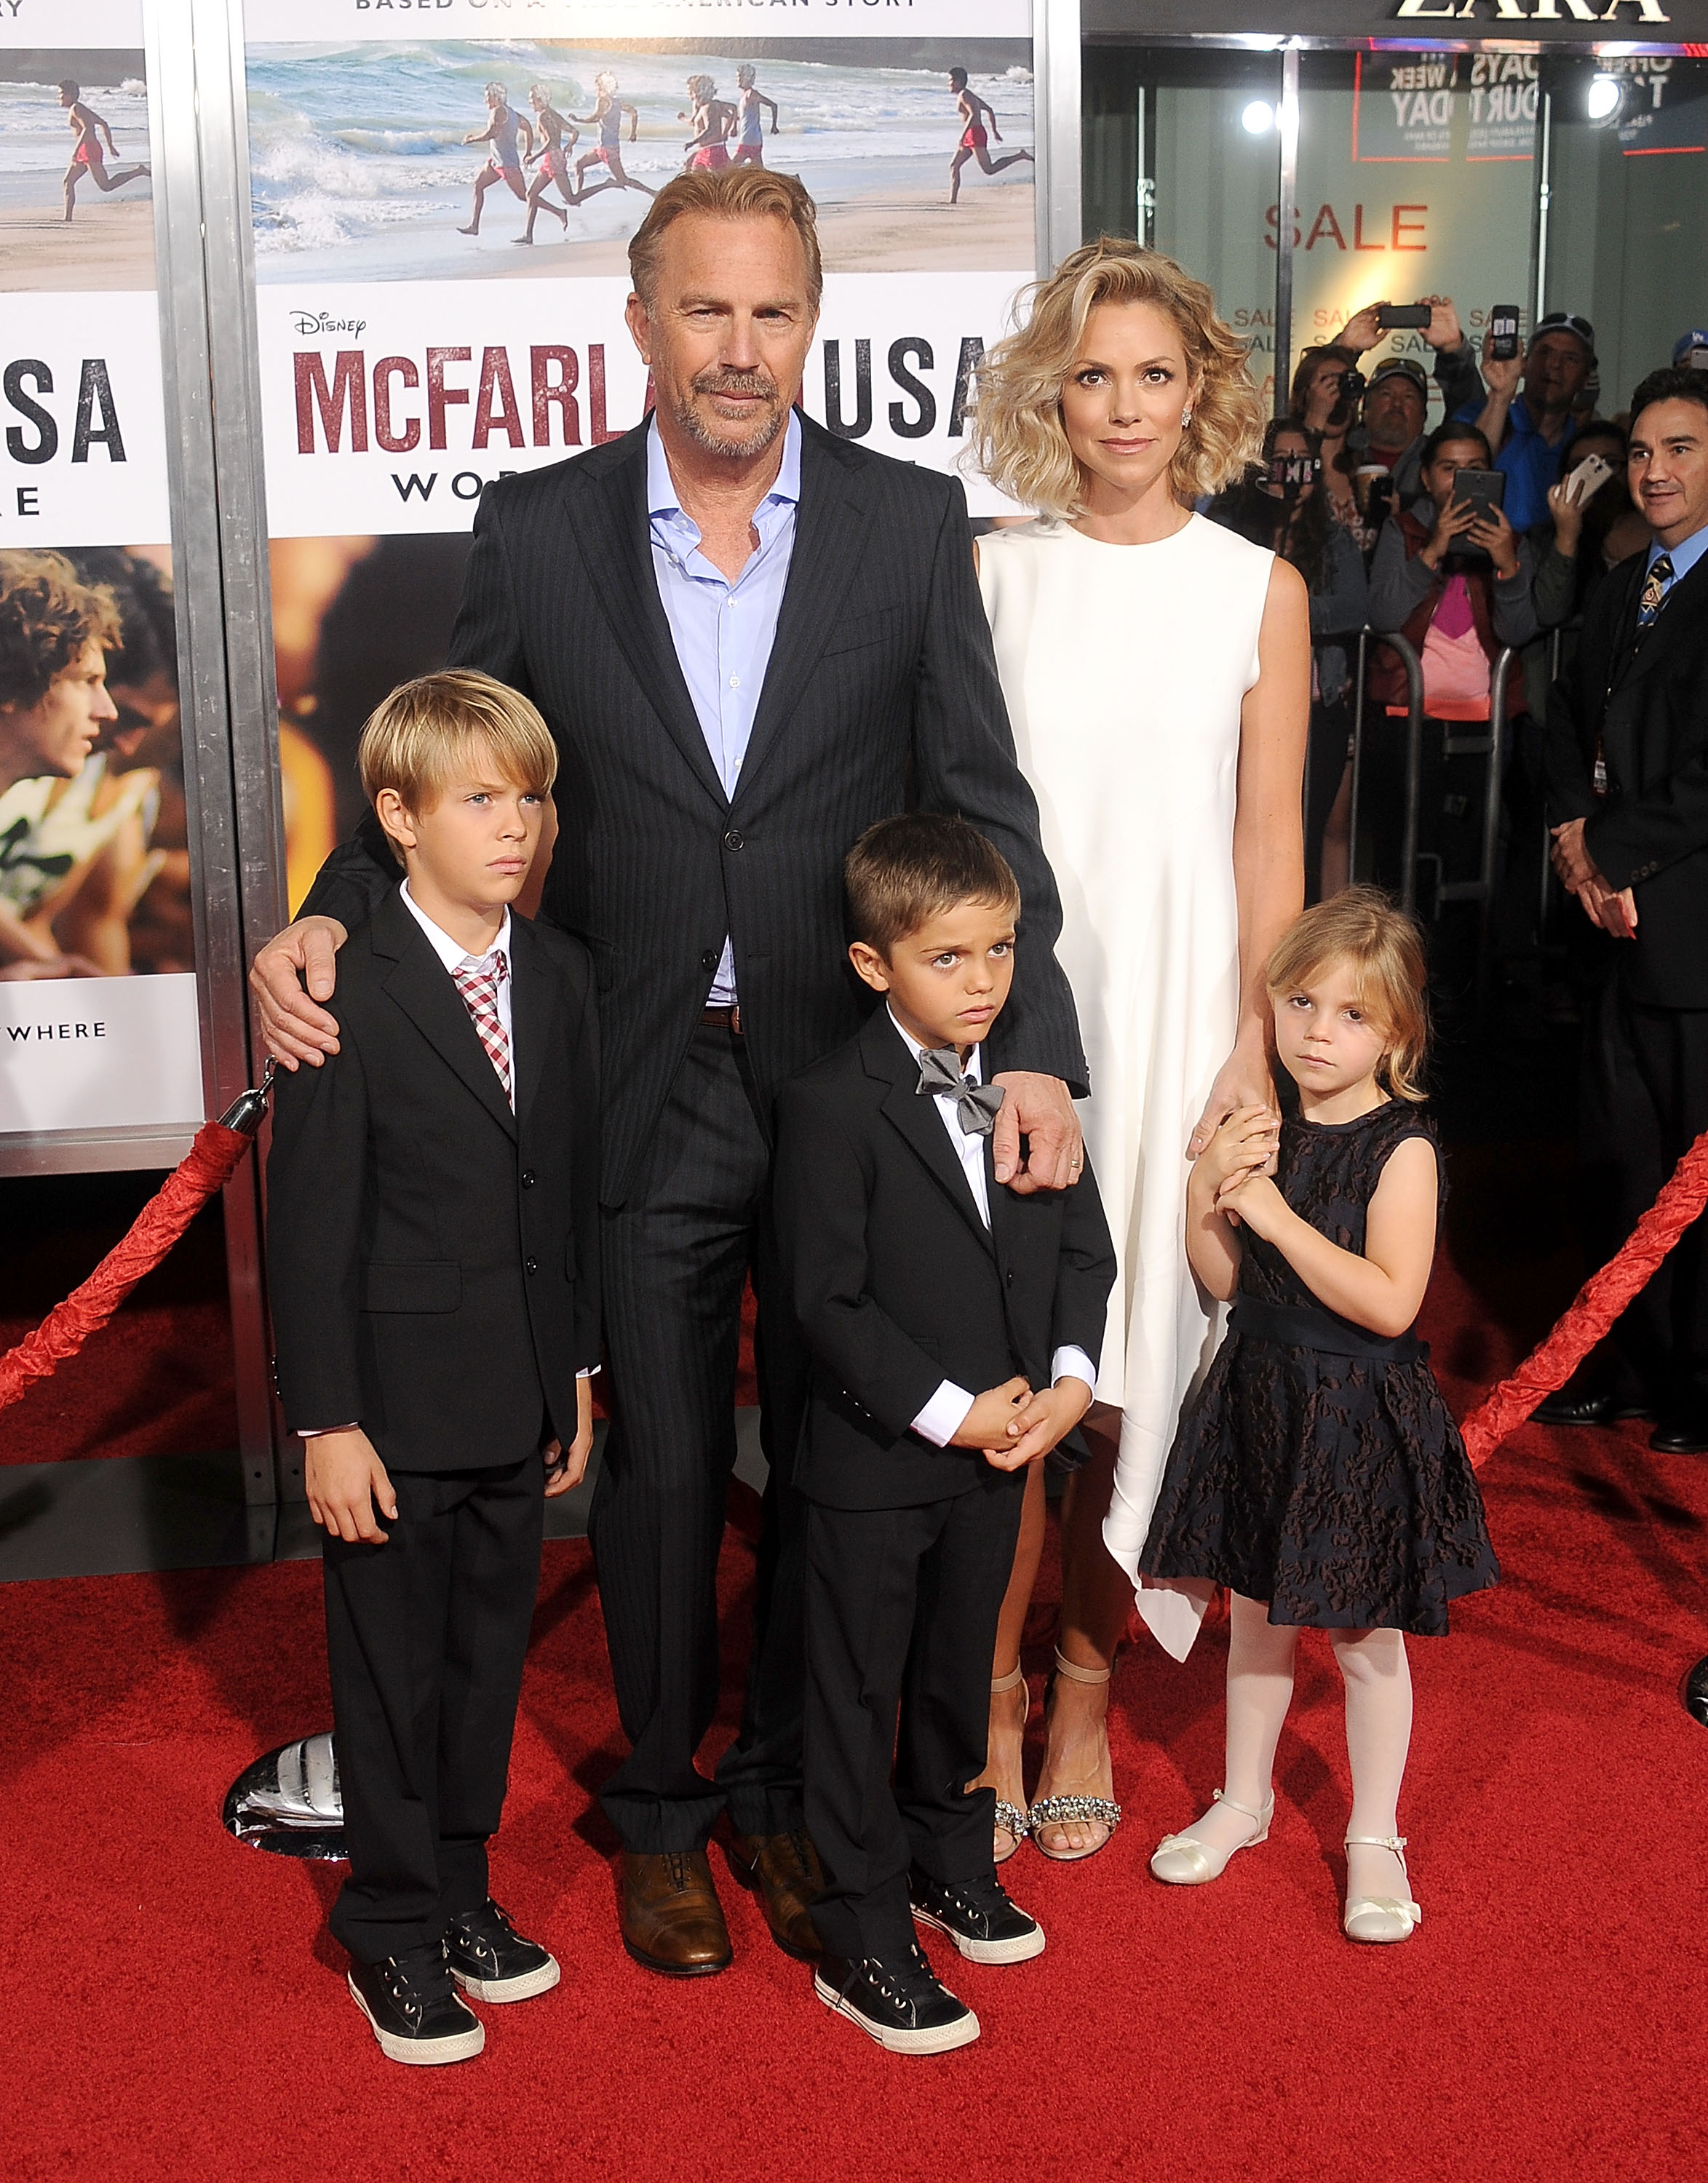 Kevin Costner, Christine Baumgartner and their children, Grace Avery Costner, Hayes Logan Costner and Cayden Wyatt Costner, arrive at the premiere of Disney's "McFarland, USA" at the El Capitan Theatre, on February 9, 2015, in Hollywood, California. | Source: Getty Images